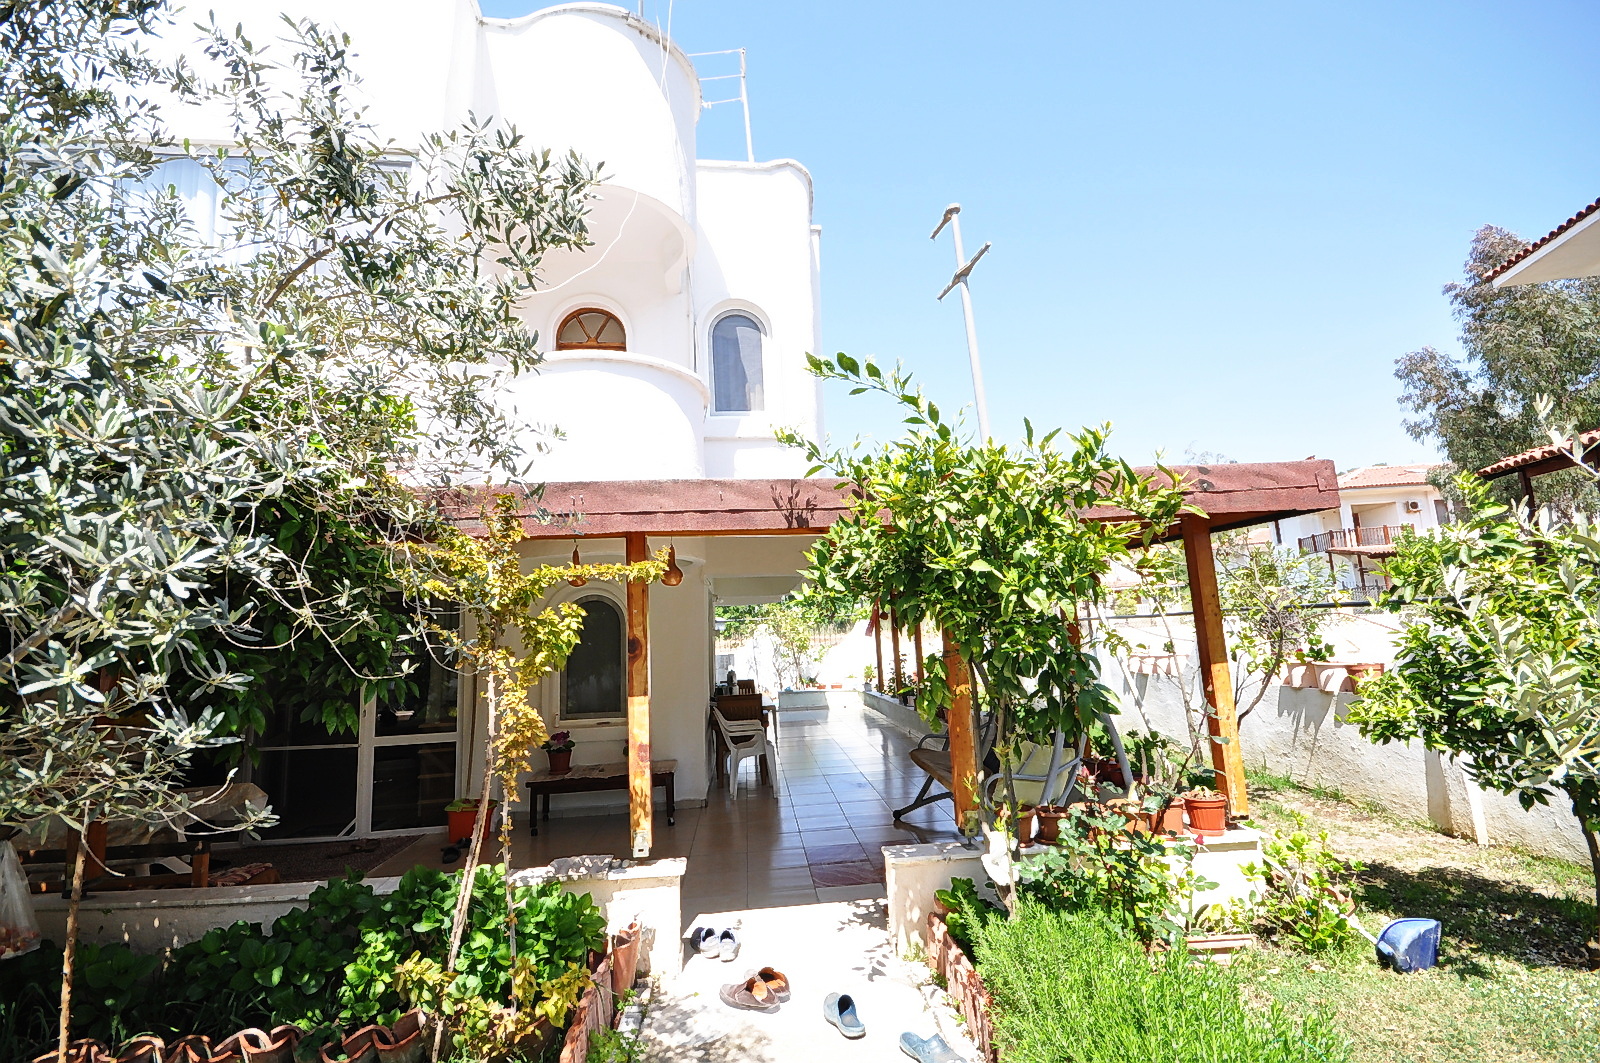 2 Bedroom Typical Turkish Villa with Own Garden for Sale